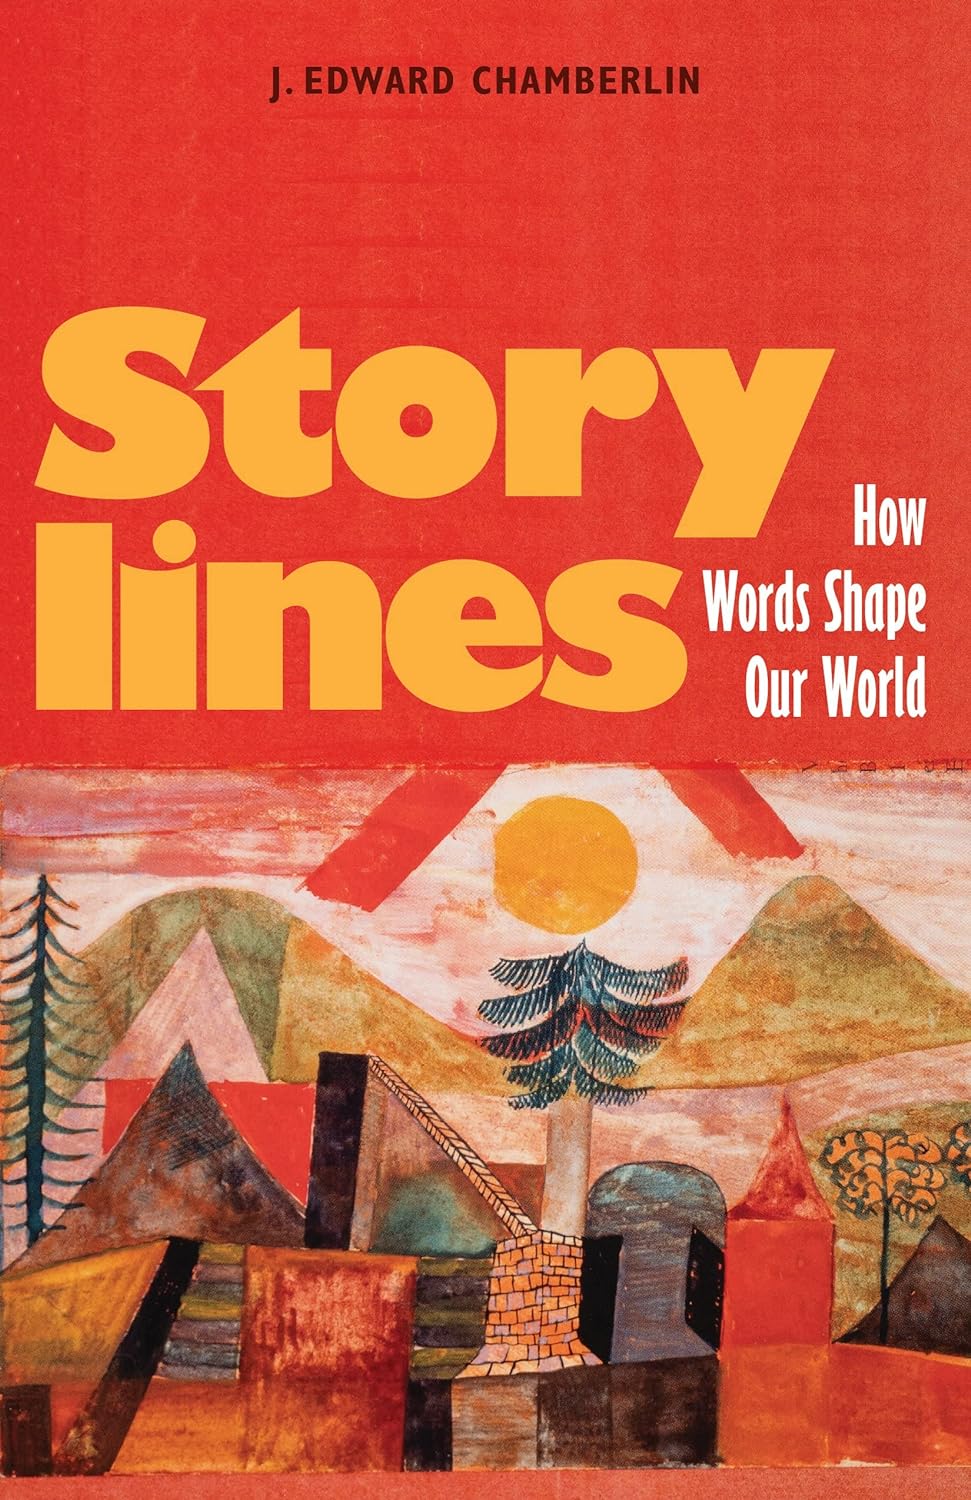 Storylines: How Words Shape Our World by J. Edward Chamberlin